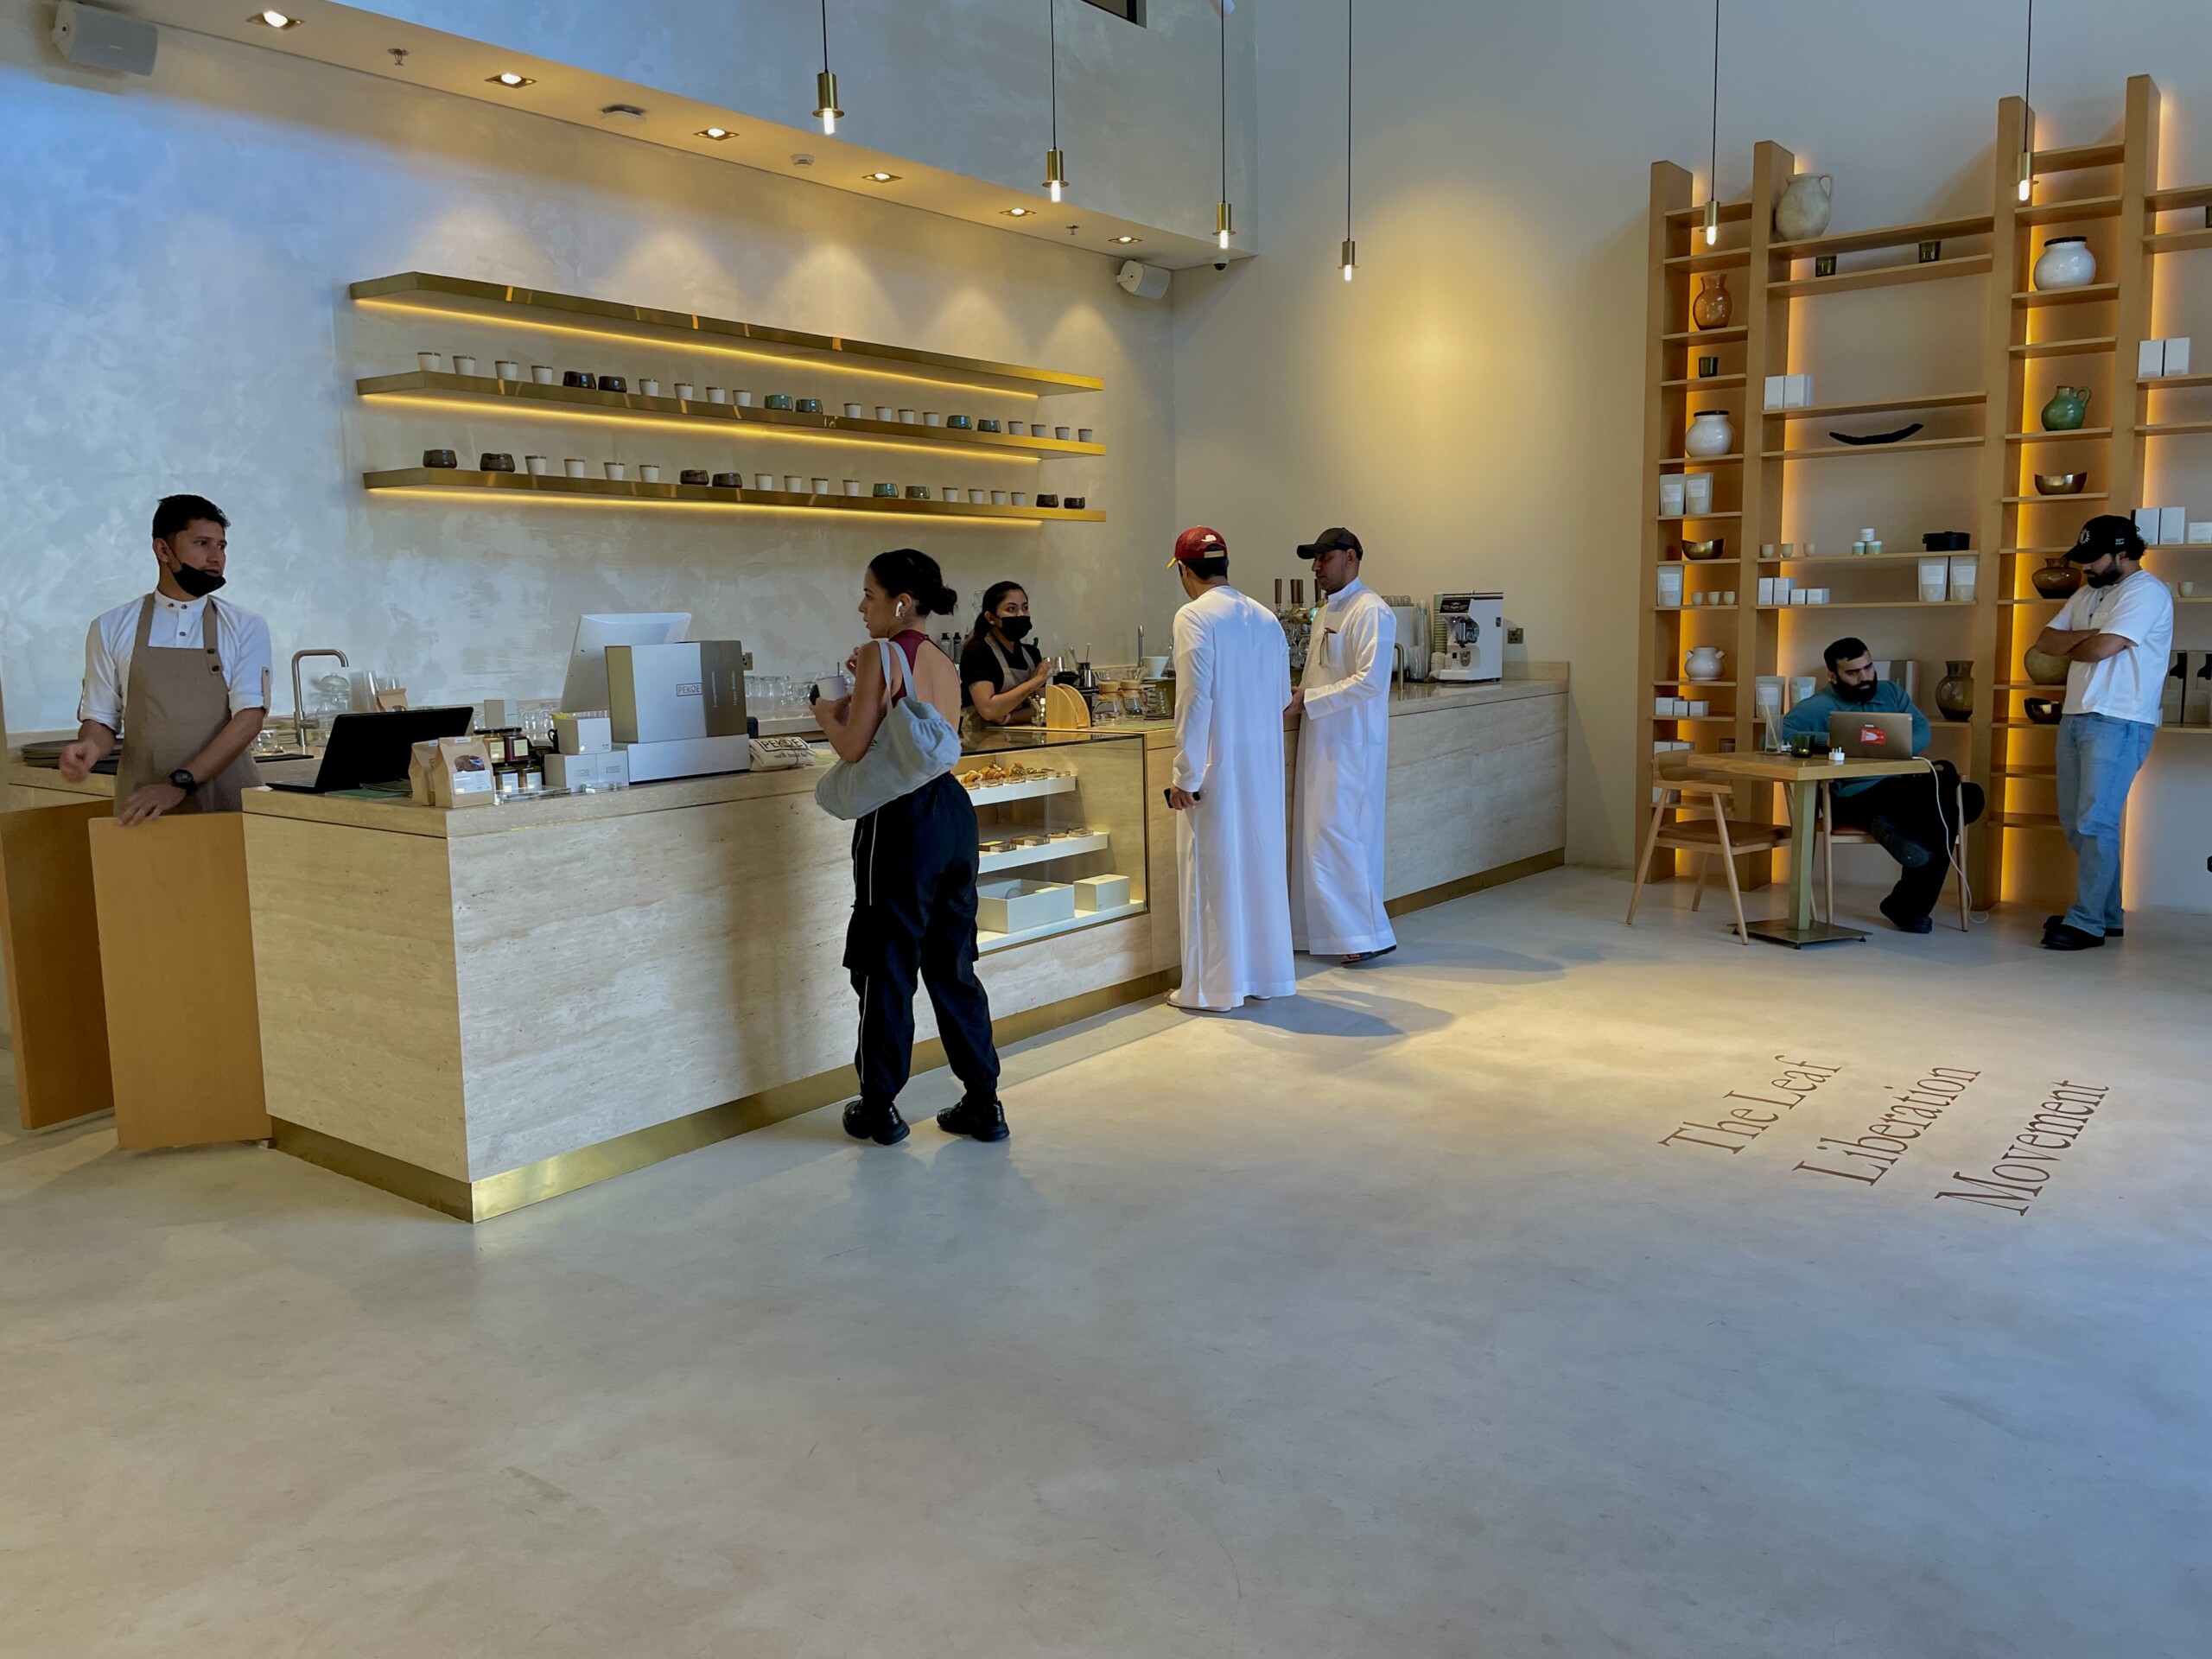 Pekoe Cafe - Microcement Flooring and Walls - Interior Reception